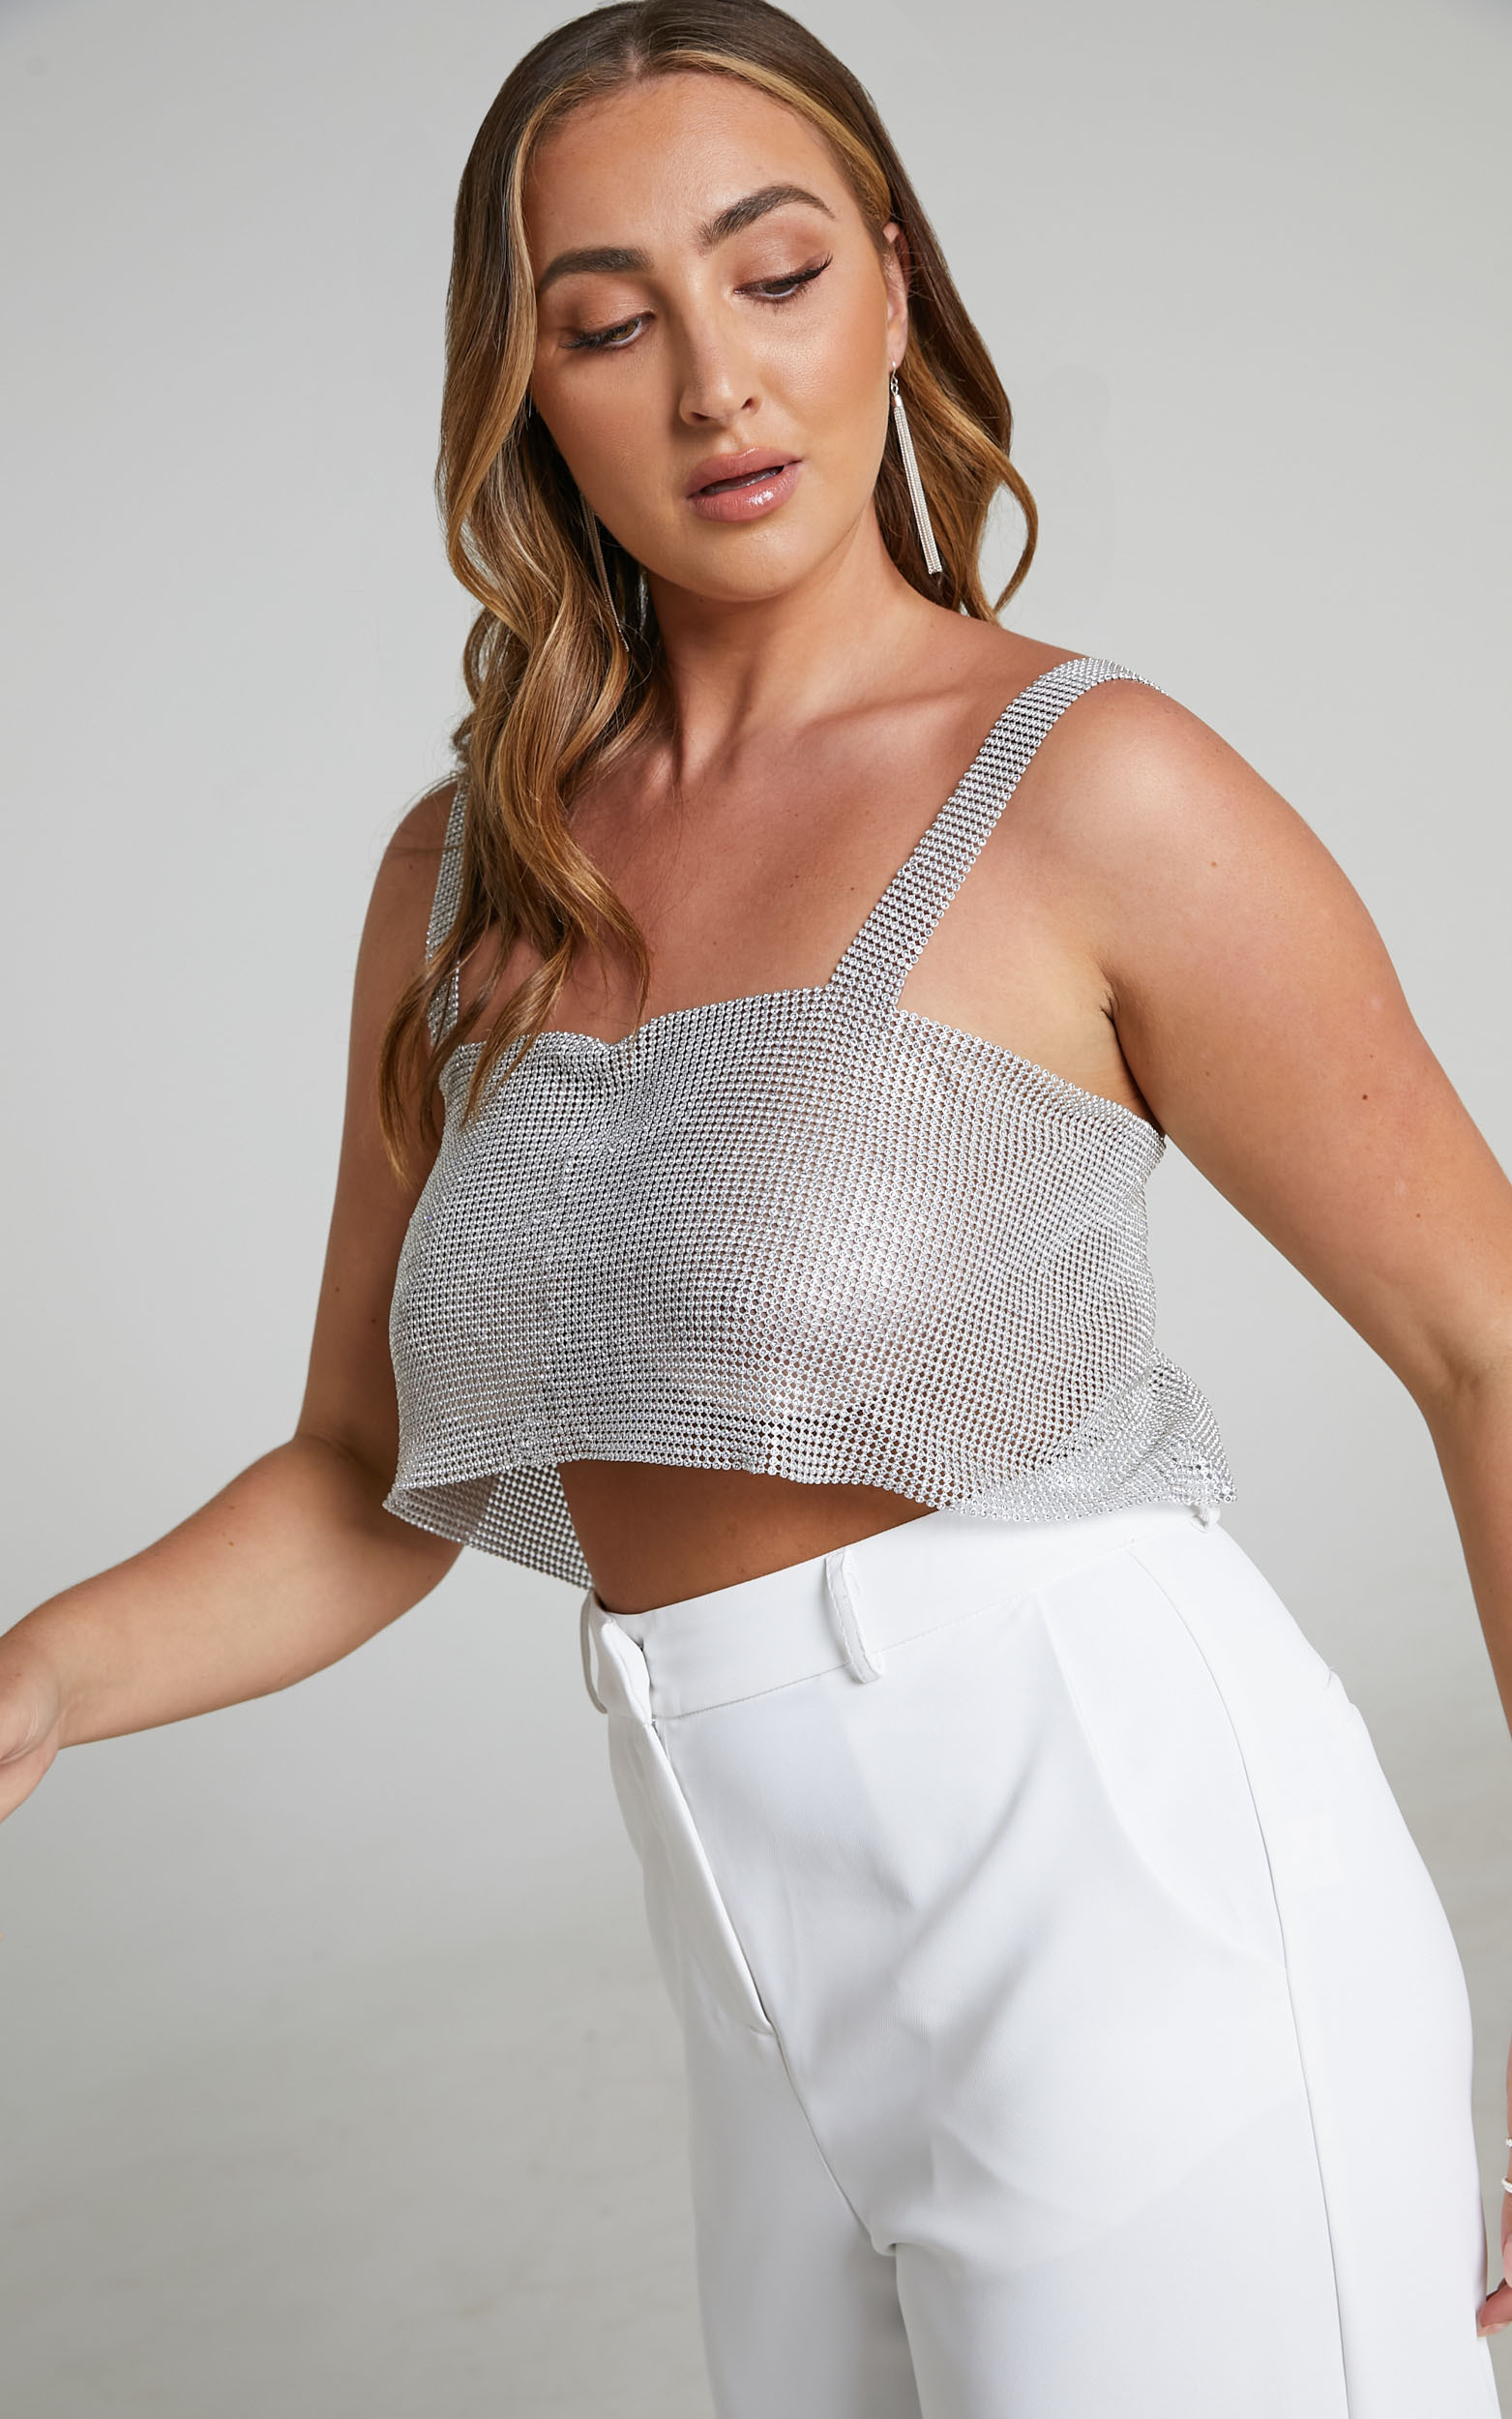 Starry Nights Mesh Cropped Top in Silver - M/L, SLV2, hi-res image number null